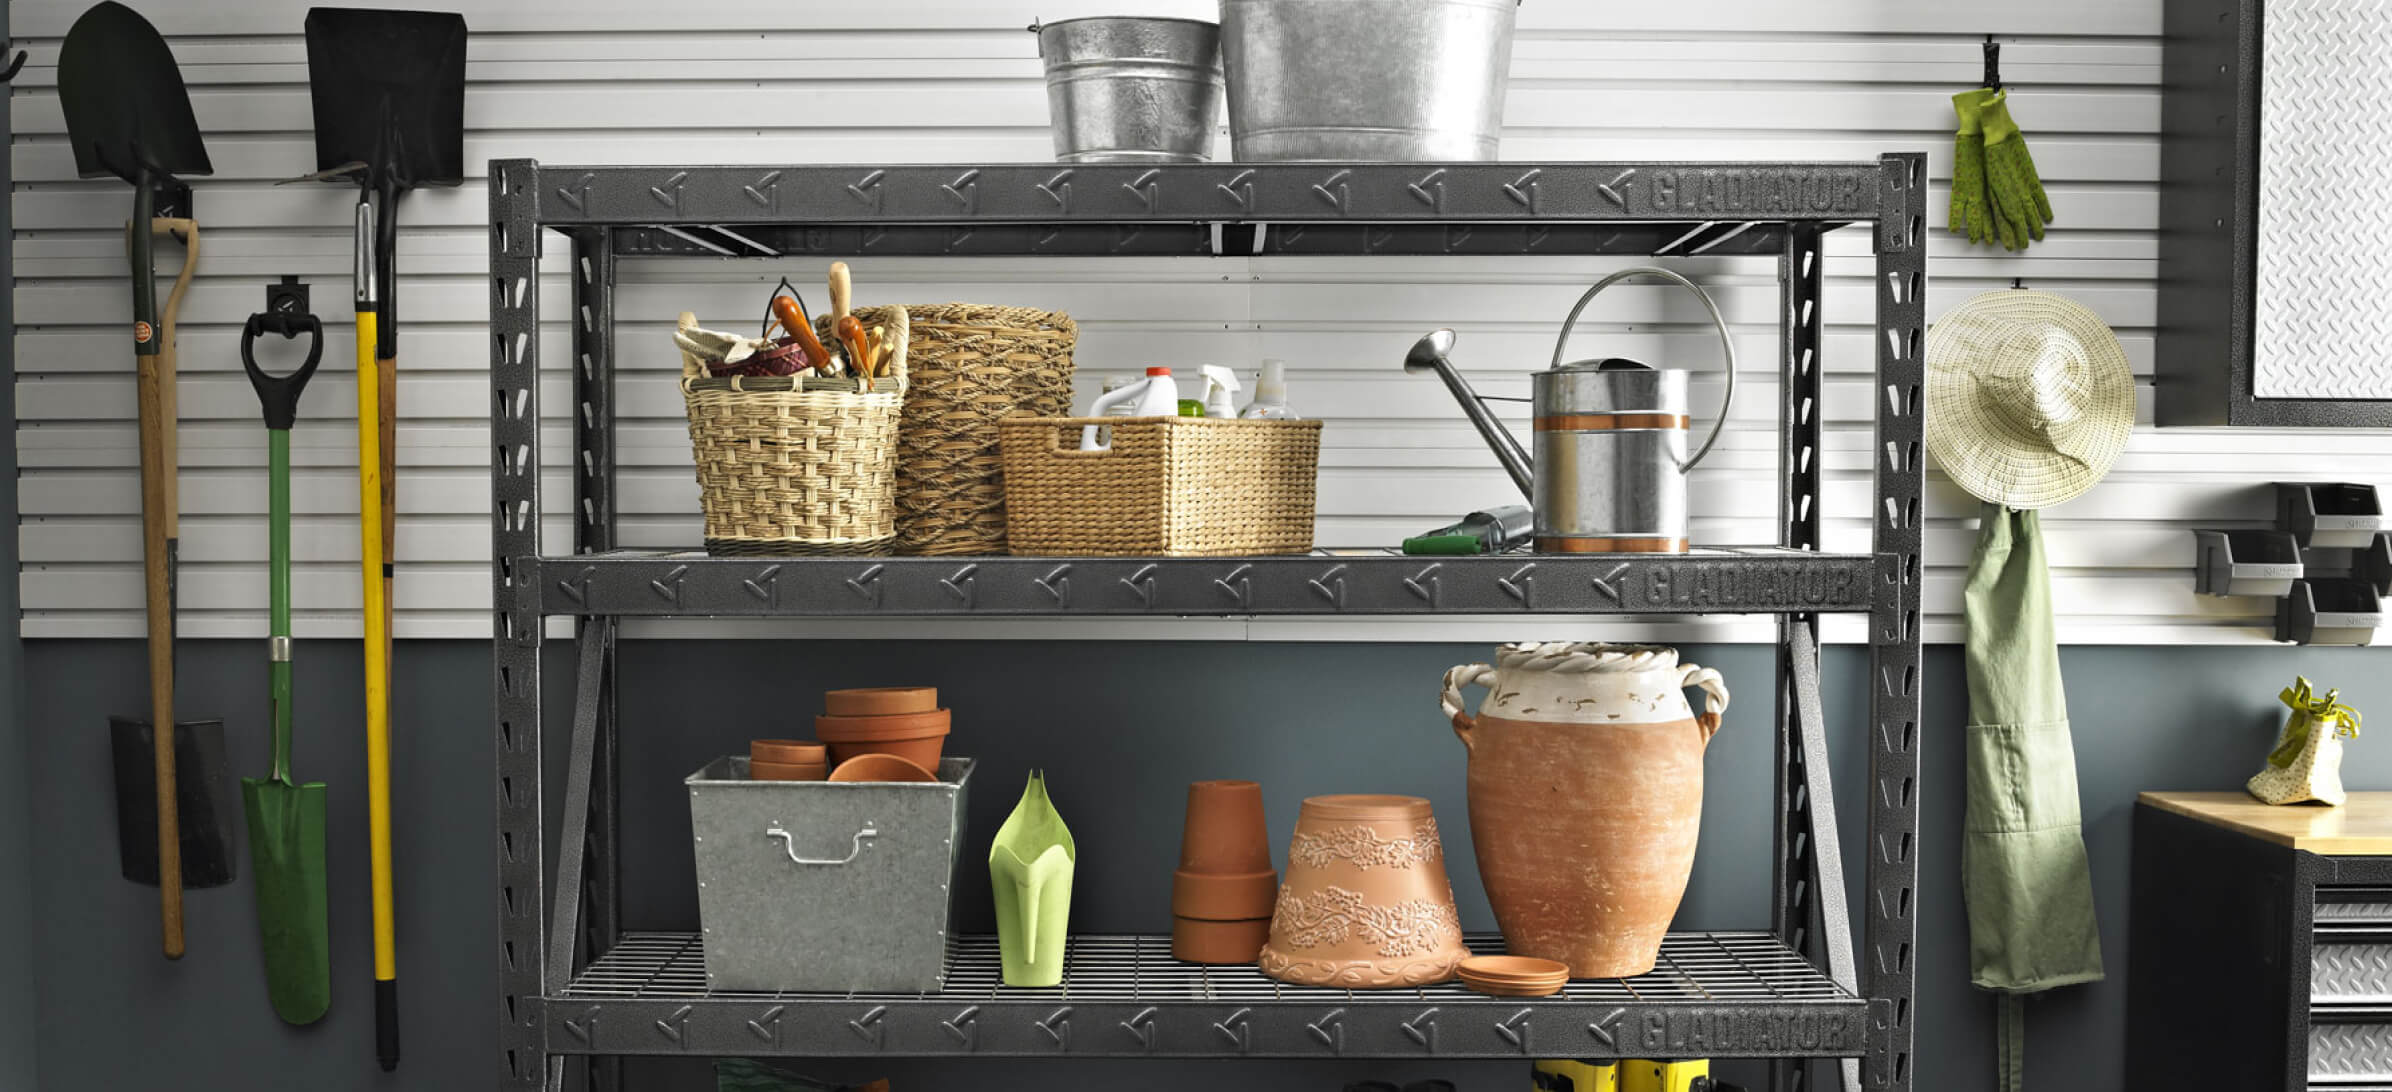 A Gladiator brand wall storage unit with various gardening implements.